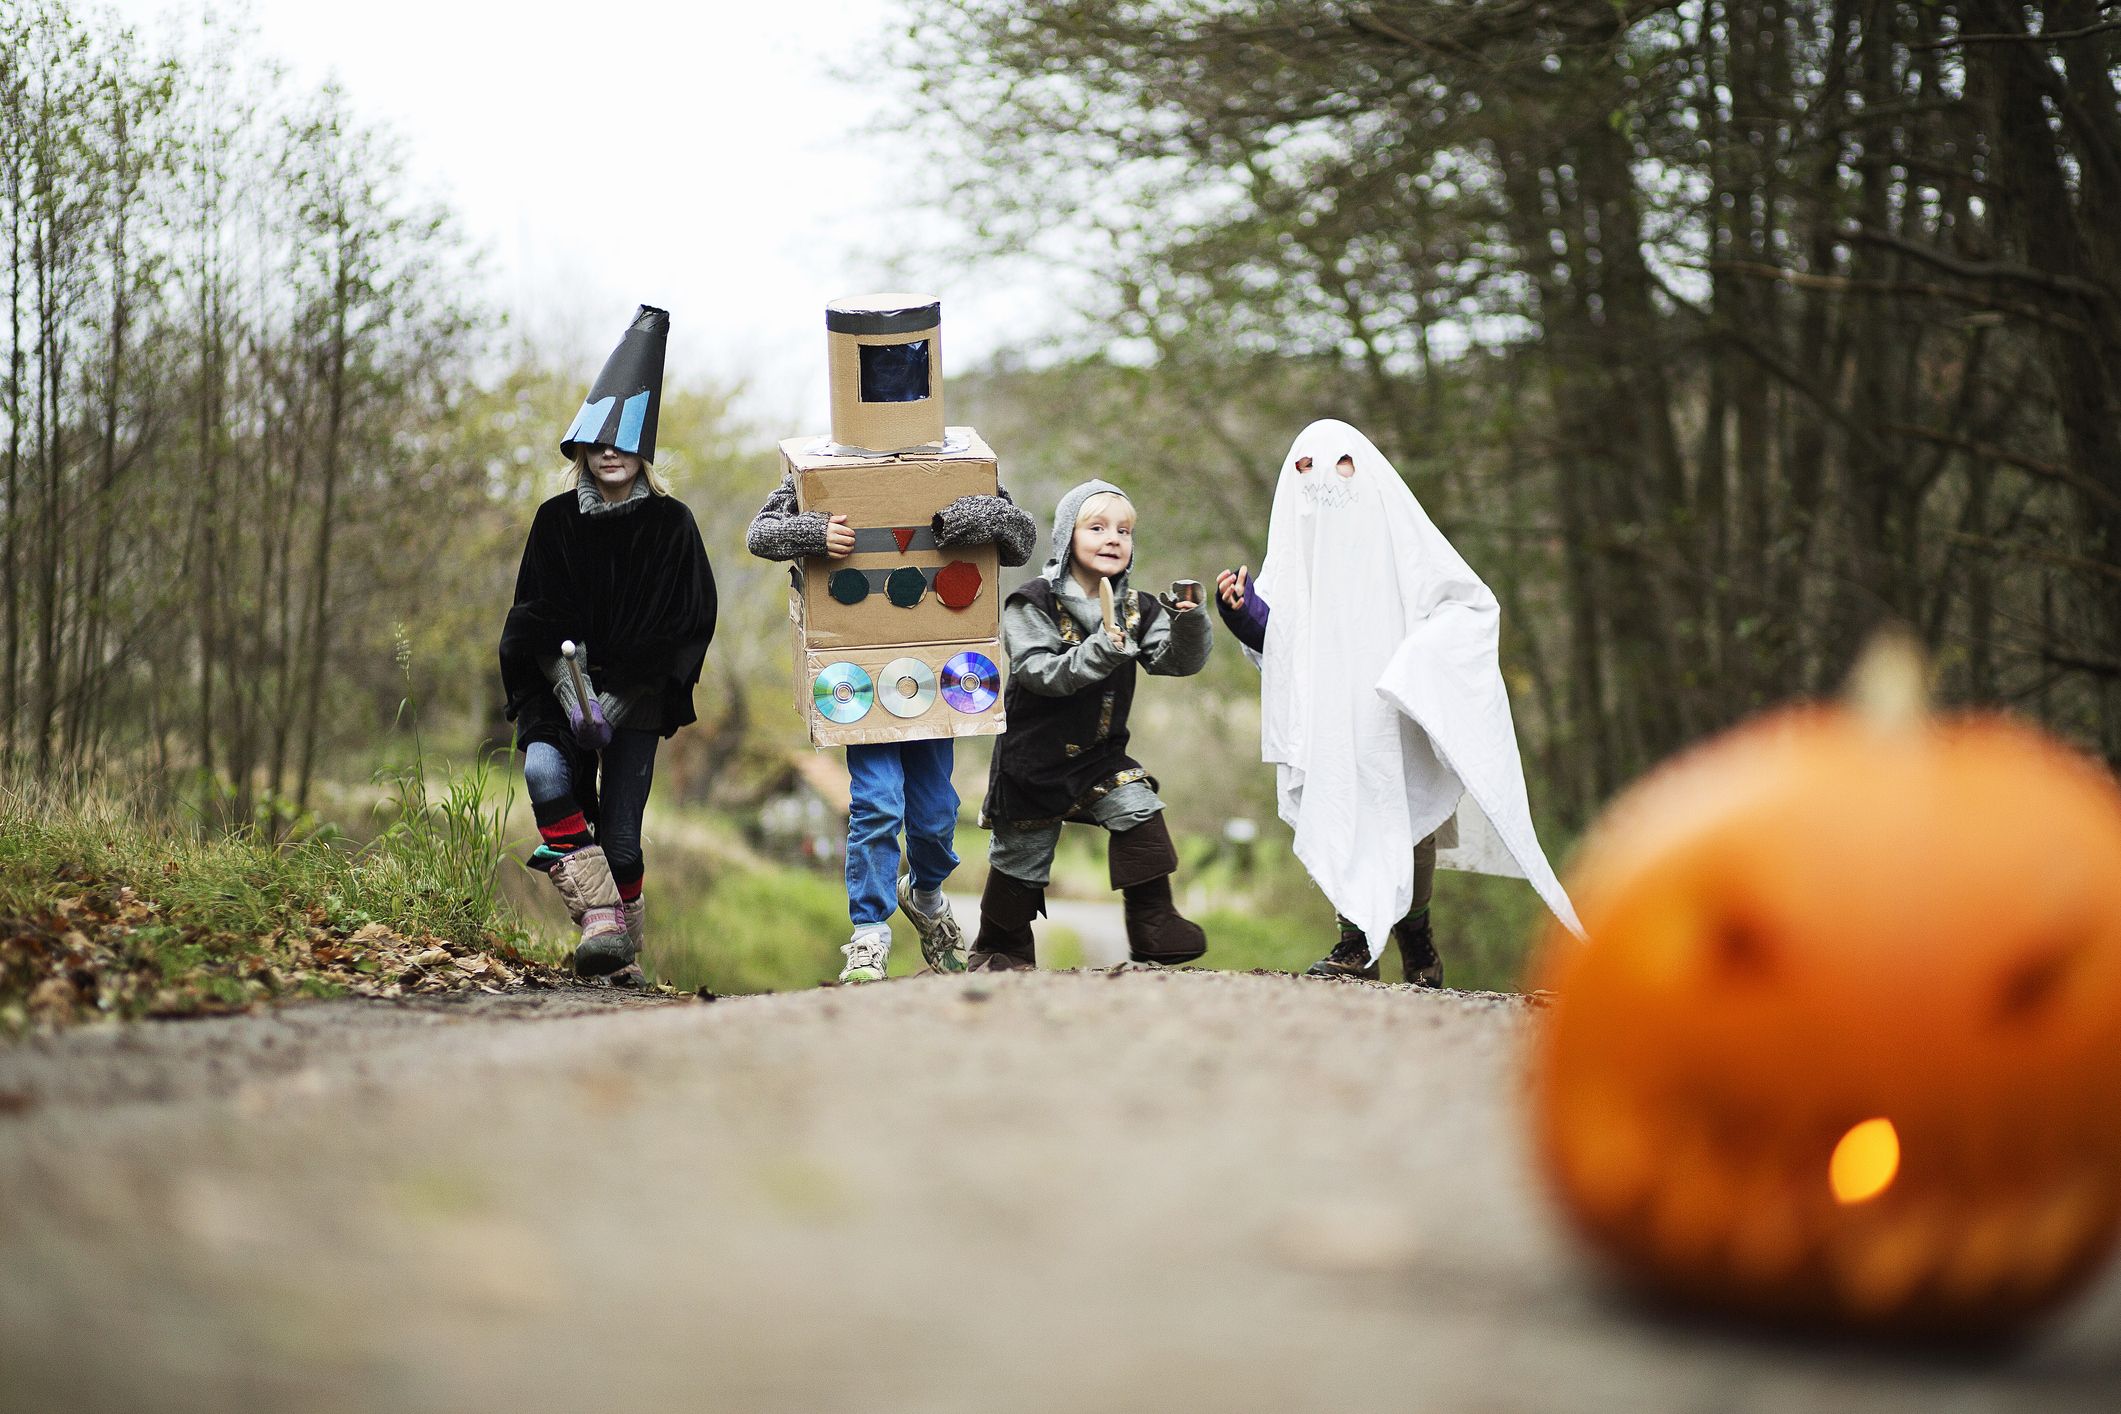 21 Creative And Easy Last Minute Halloween Costumes for kids